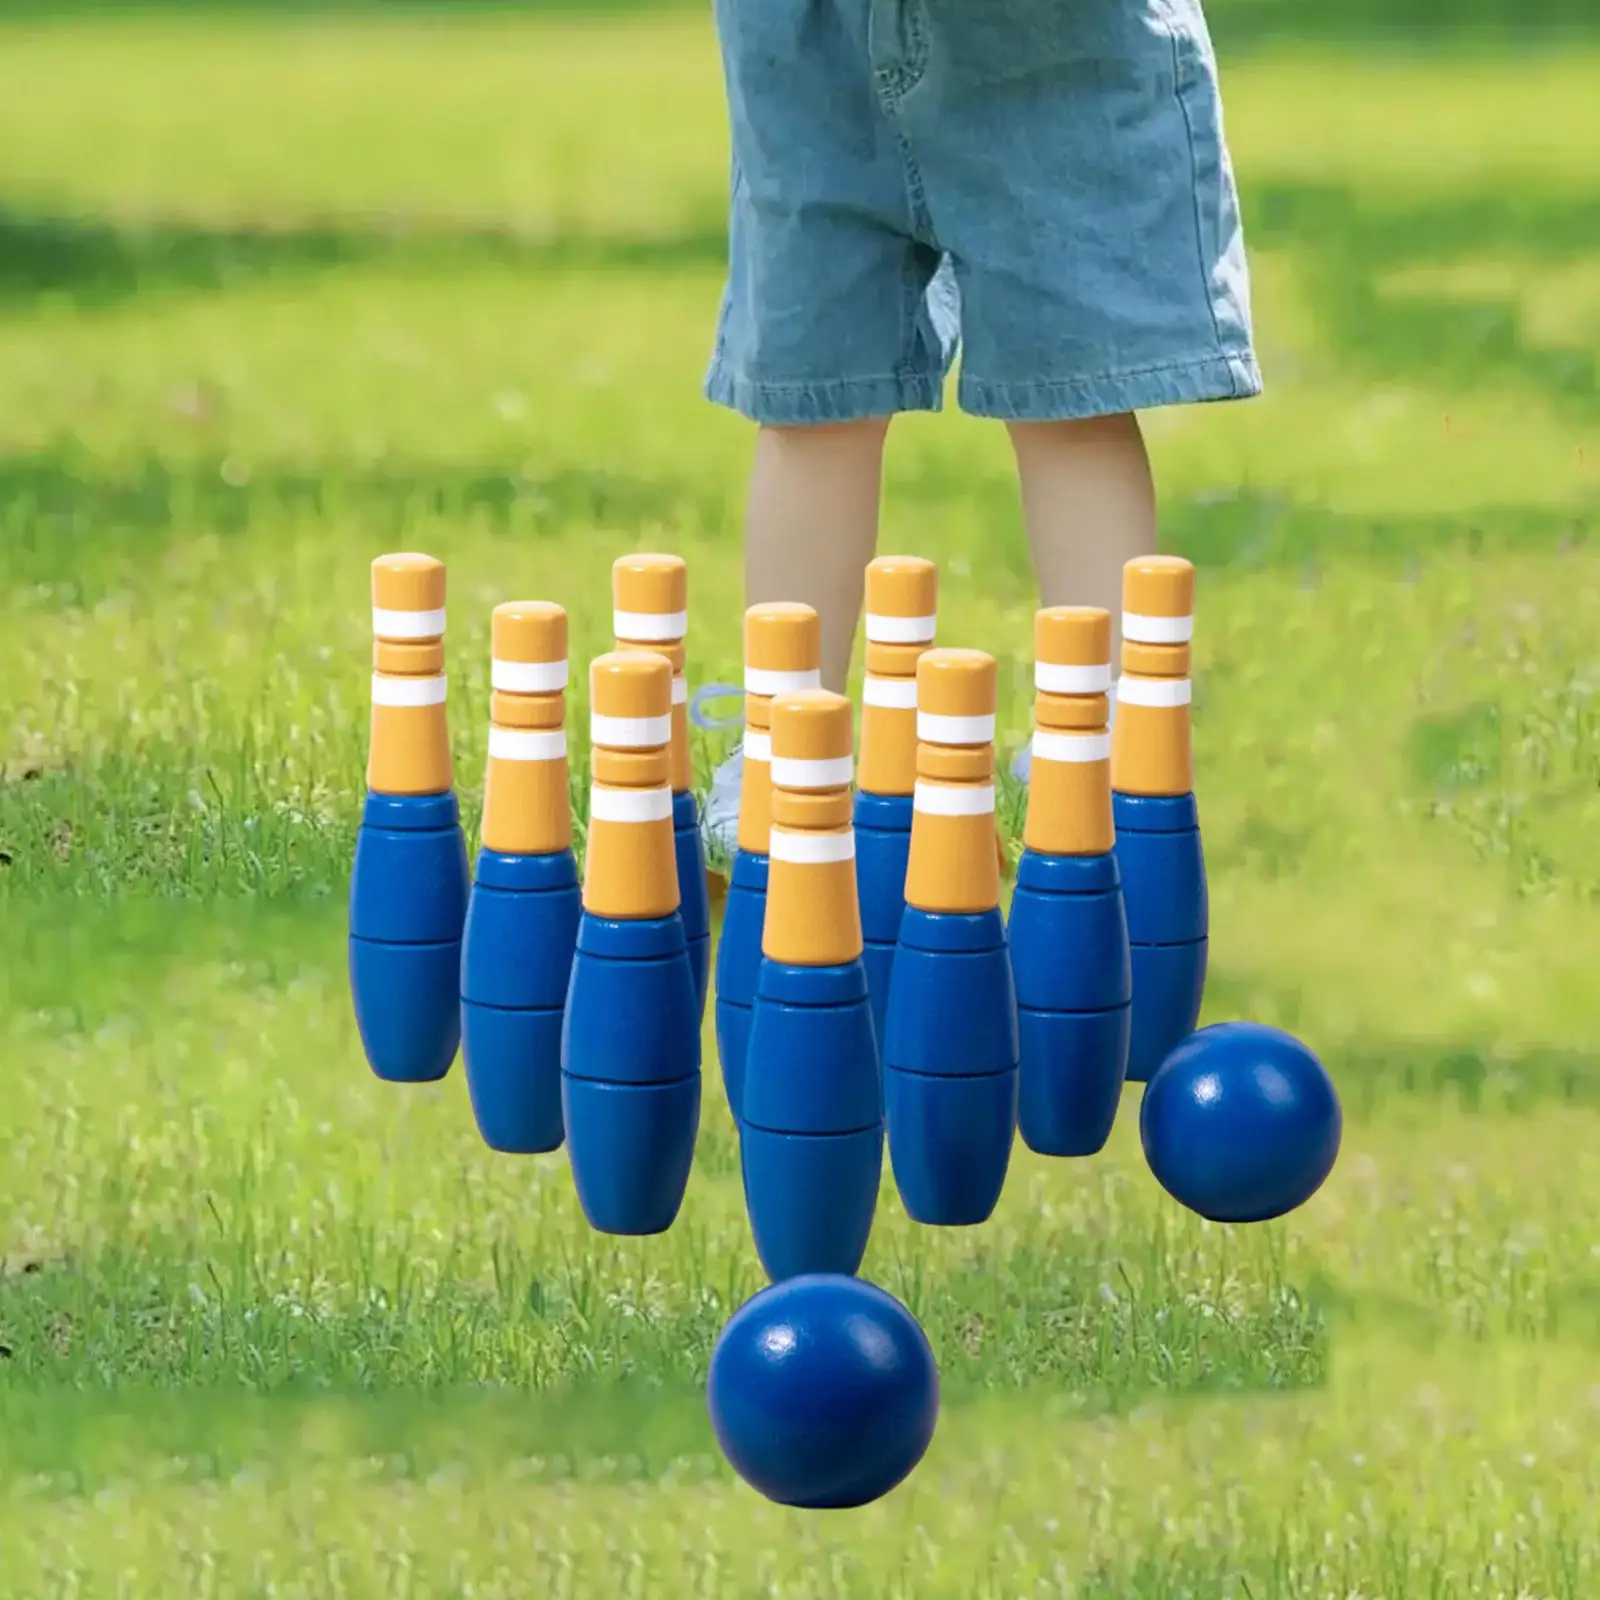 

Wood Kids Bowling Toy 10 Bottles Outdoor Family Game Prop Wooden Bowling Game Props for Garden Indoor Gifts Lawn Children